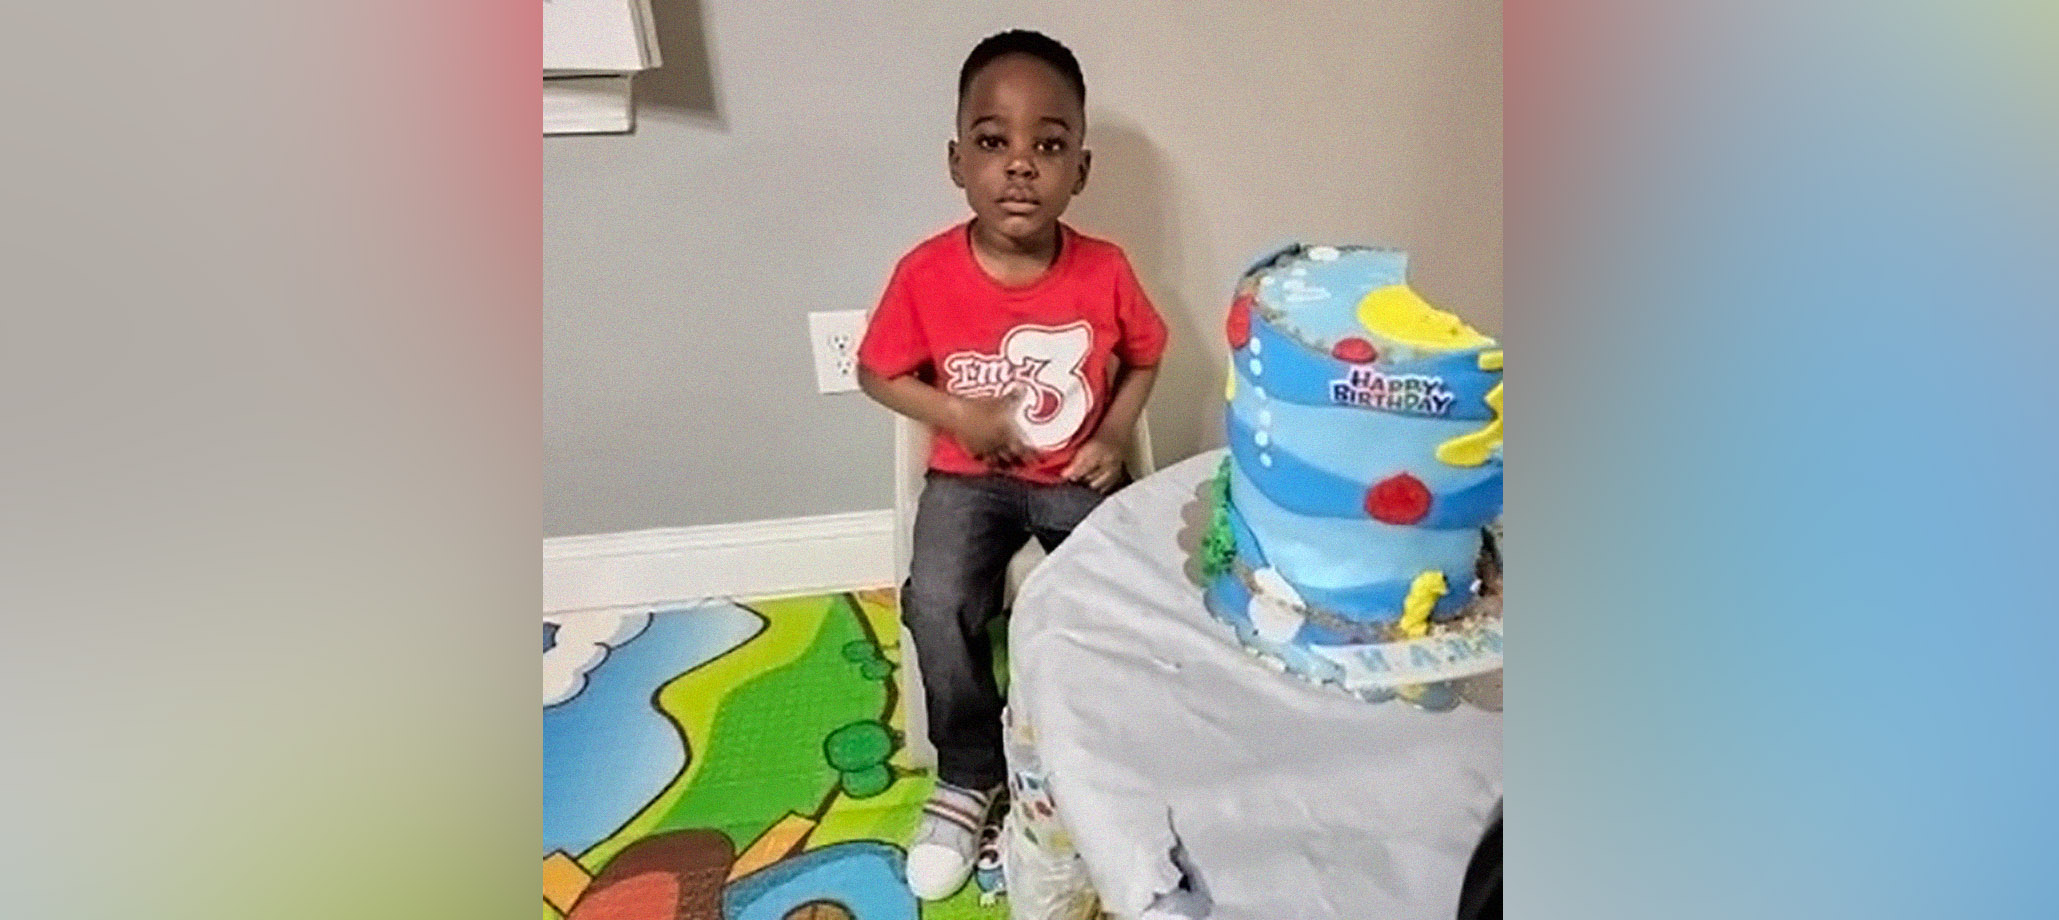 PHOTO: A child identified as "Harry" by the Lowell Police Department is pictured in an image released by their information office. Law enforcement officers are searching for the 3-year-old boy who went missing from his babysitter's yard on June 14, 2022.